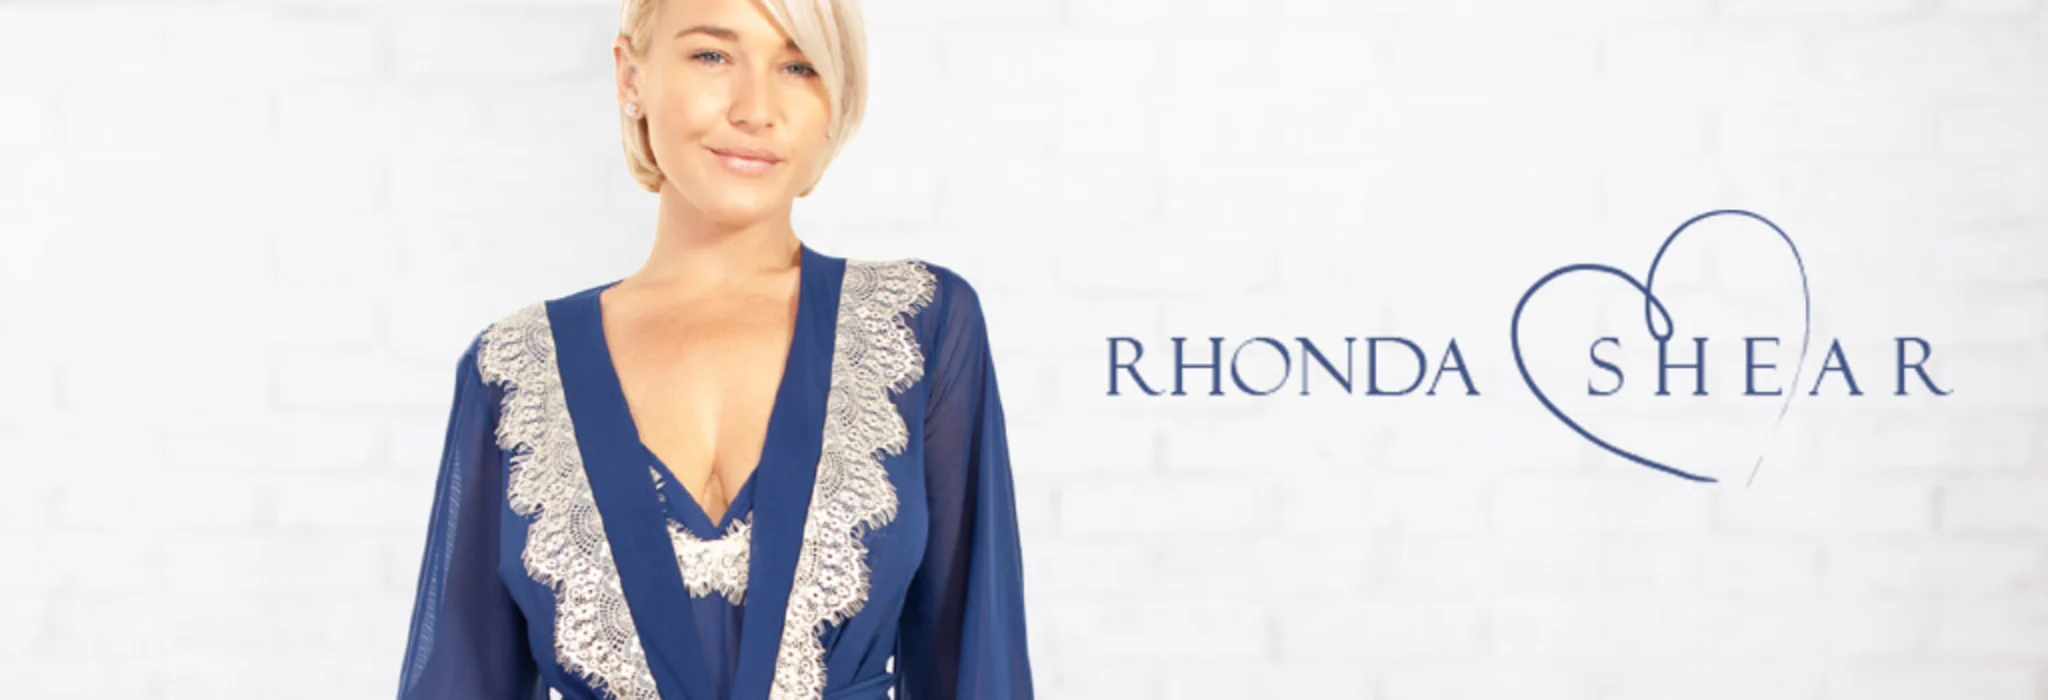 Rhonda Shear Intimates  Stealing the spotlight every time : The